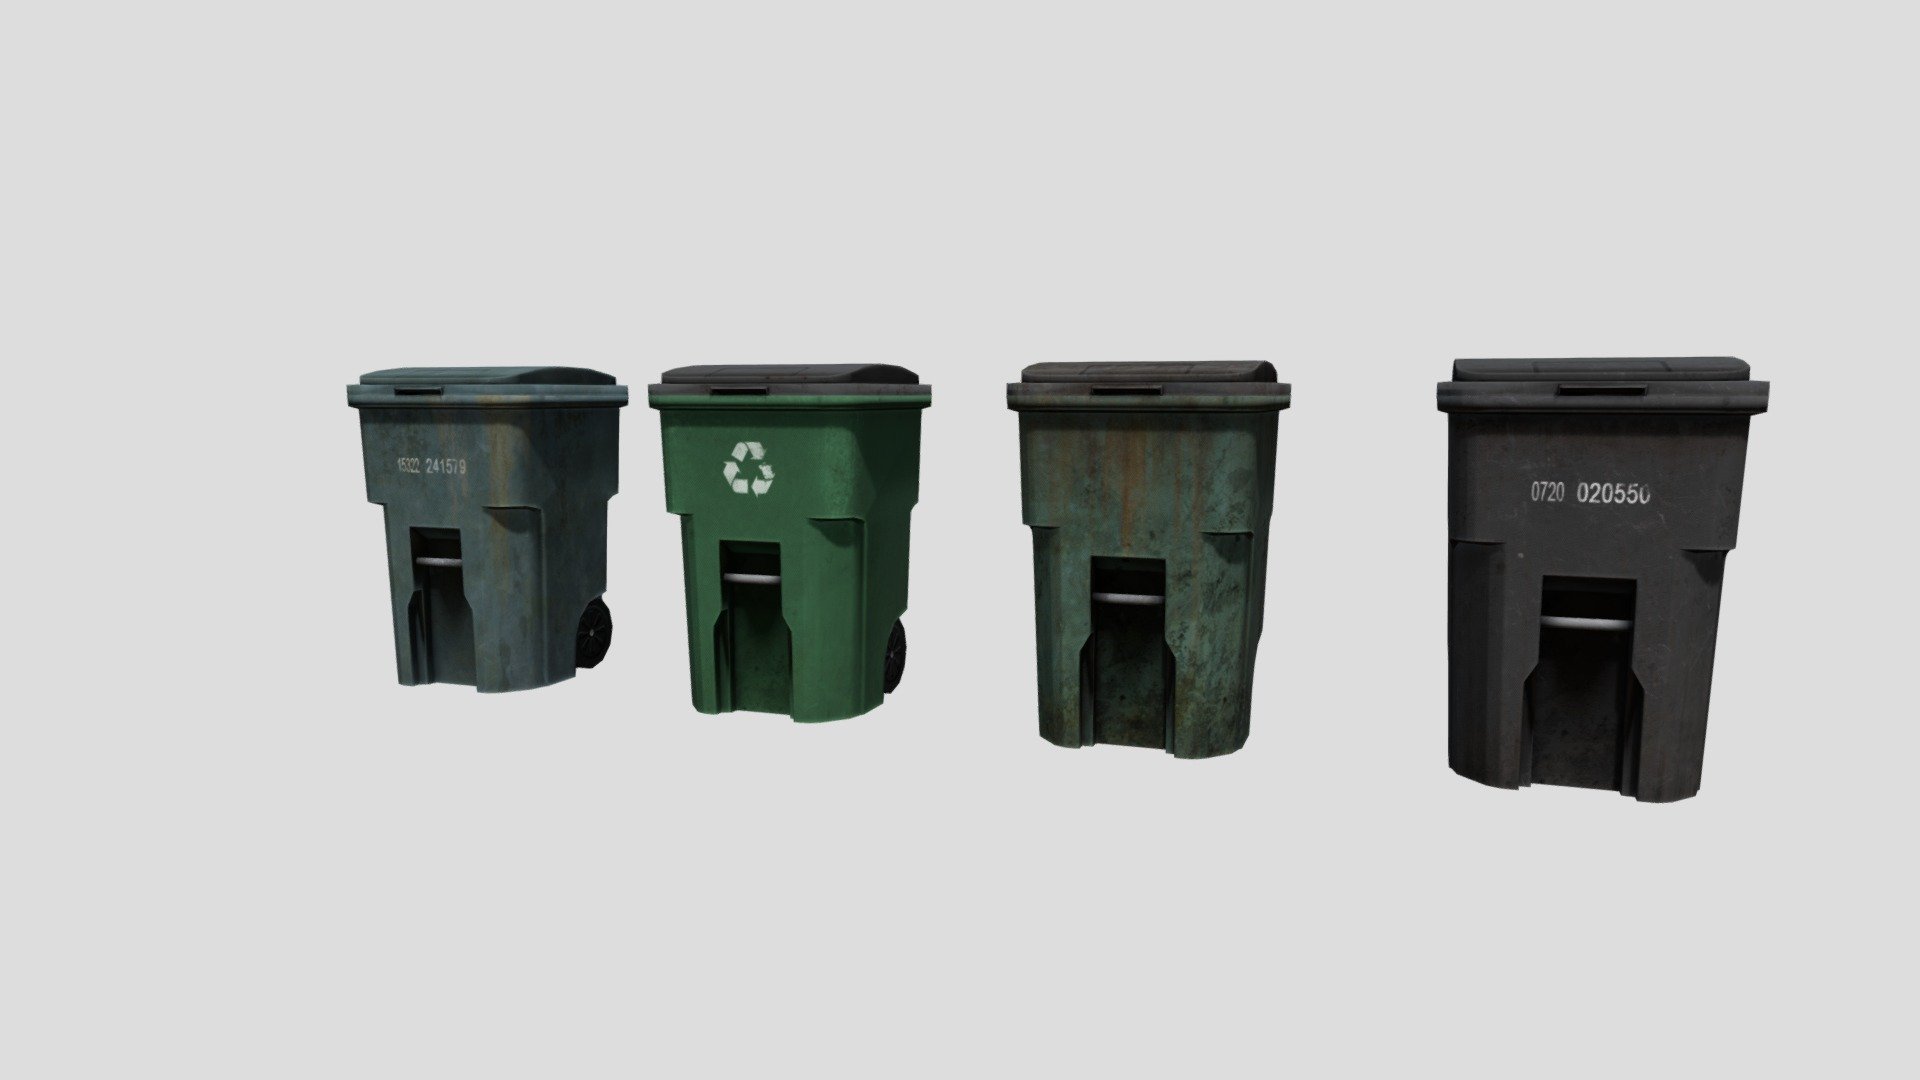 3D Trash Cans
The pack has highly detailed trash cans ready for use in your project. Just drag and drop prefabs into your scene and achieve beautiful results in no time. Available formats FBX, 3DS Max 2017



We are here to empower the creators. Please contact us via the [Contact US](https://aaanimators.com/#contact-area) page if you are having issues with our assets. 




The following document provides a highly detailed description of the asset:
[READ ME]()




**Mesh complexities:**


Trashcan_03 788 verts; 836 tris uv 

Trashcan_03_cap 350 verts; 408 tris uv 

Trashcan_04 1124 verts; 1276 tris uv 

Trashcan_04_cap 350 verts; 408 tris uv 

Trashcan_05 1016 verts; 1129 tris uv 

Trashcan_05_cap 350 verts; 408 tris uv 

Trashcan_06 700 verts; 712 tris uv 

Trashcan_06_cap 350 verts; 408 tris uv 



Includes 4 sets of textures with 4 materials:



● Diffuse

● Gloss

● Normal

● Specular - Trashcans - Buy Royalty Free 3D model by aaanimators 3d model